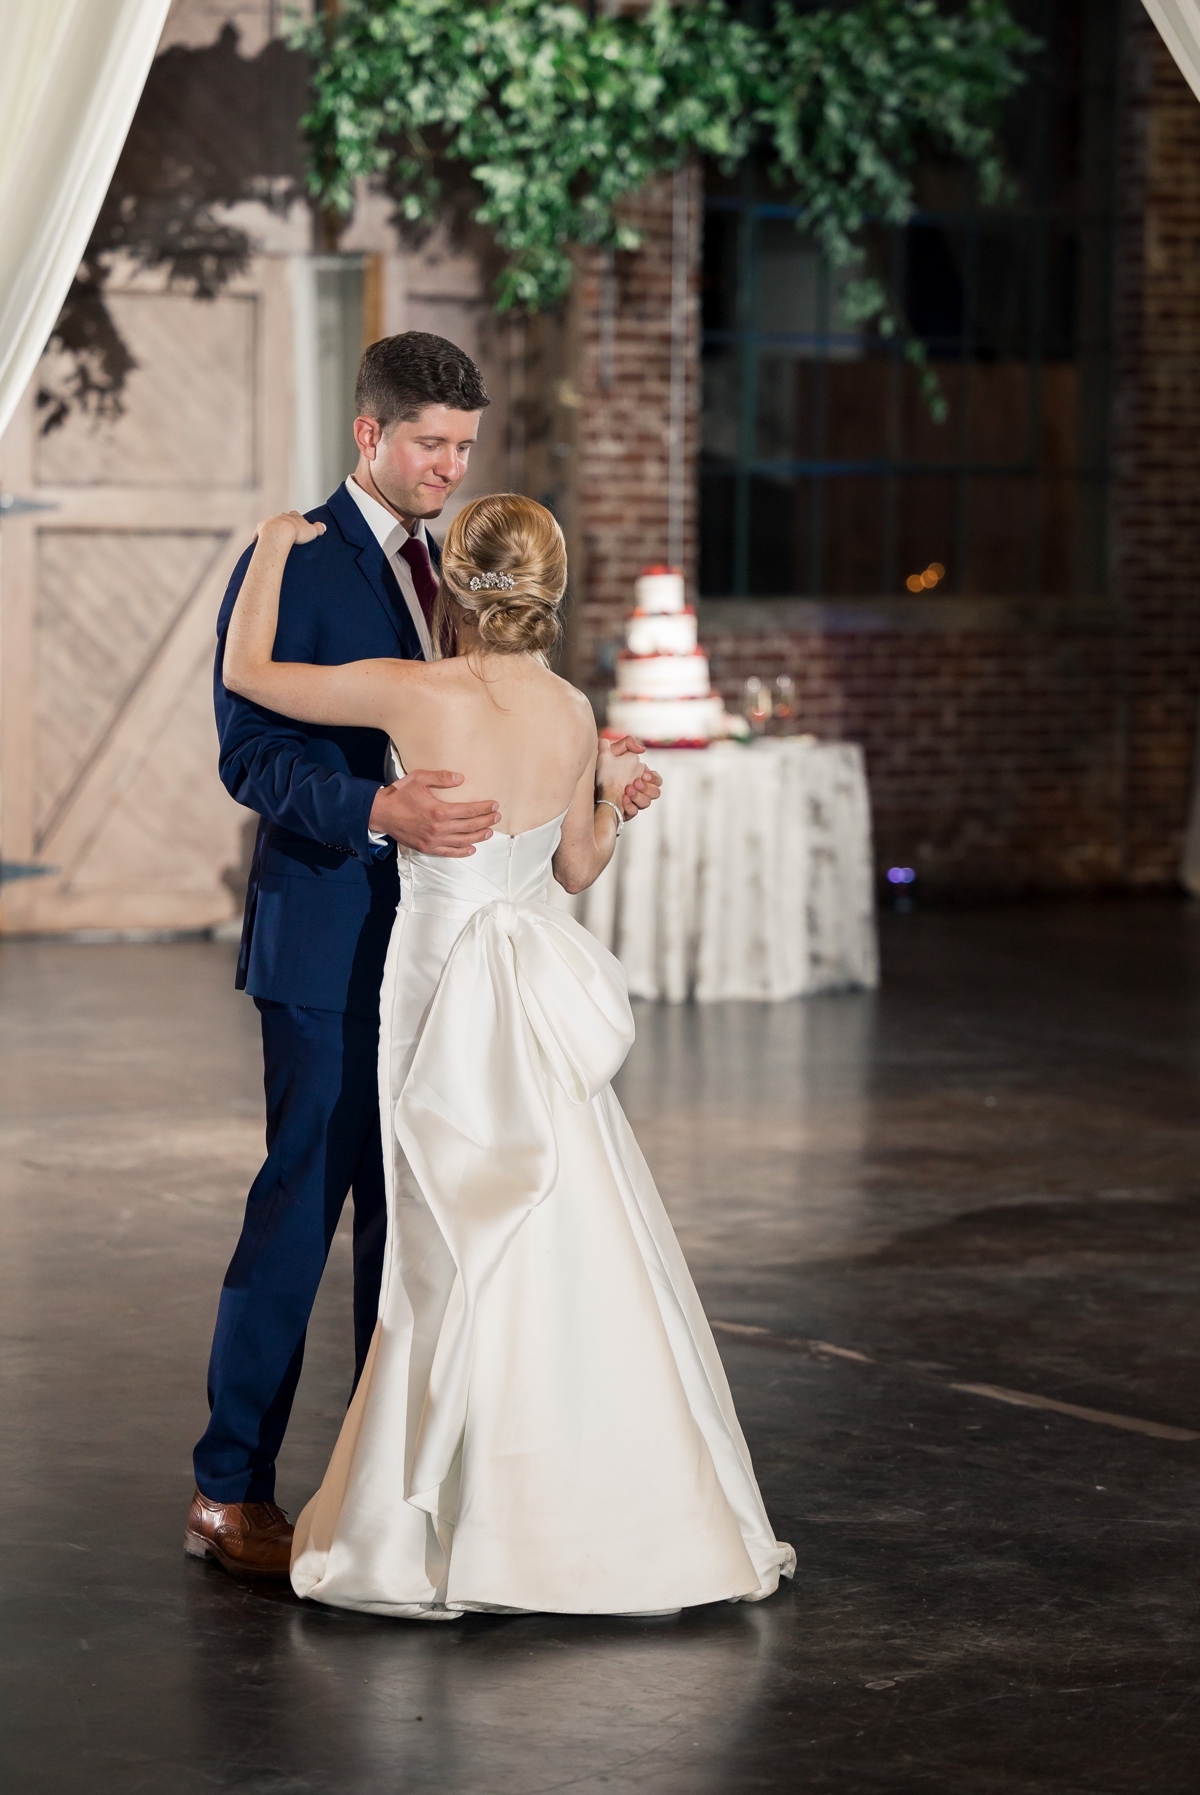 Rebecca and Josh during their first dance on their wedding day at Foundry Puritan Mill.